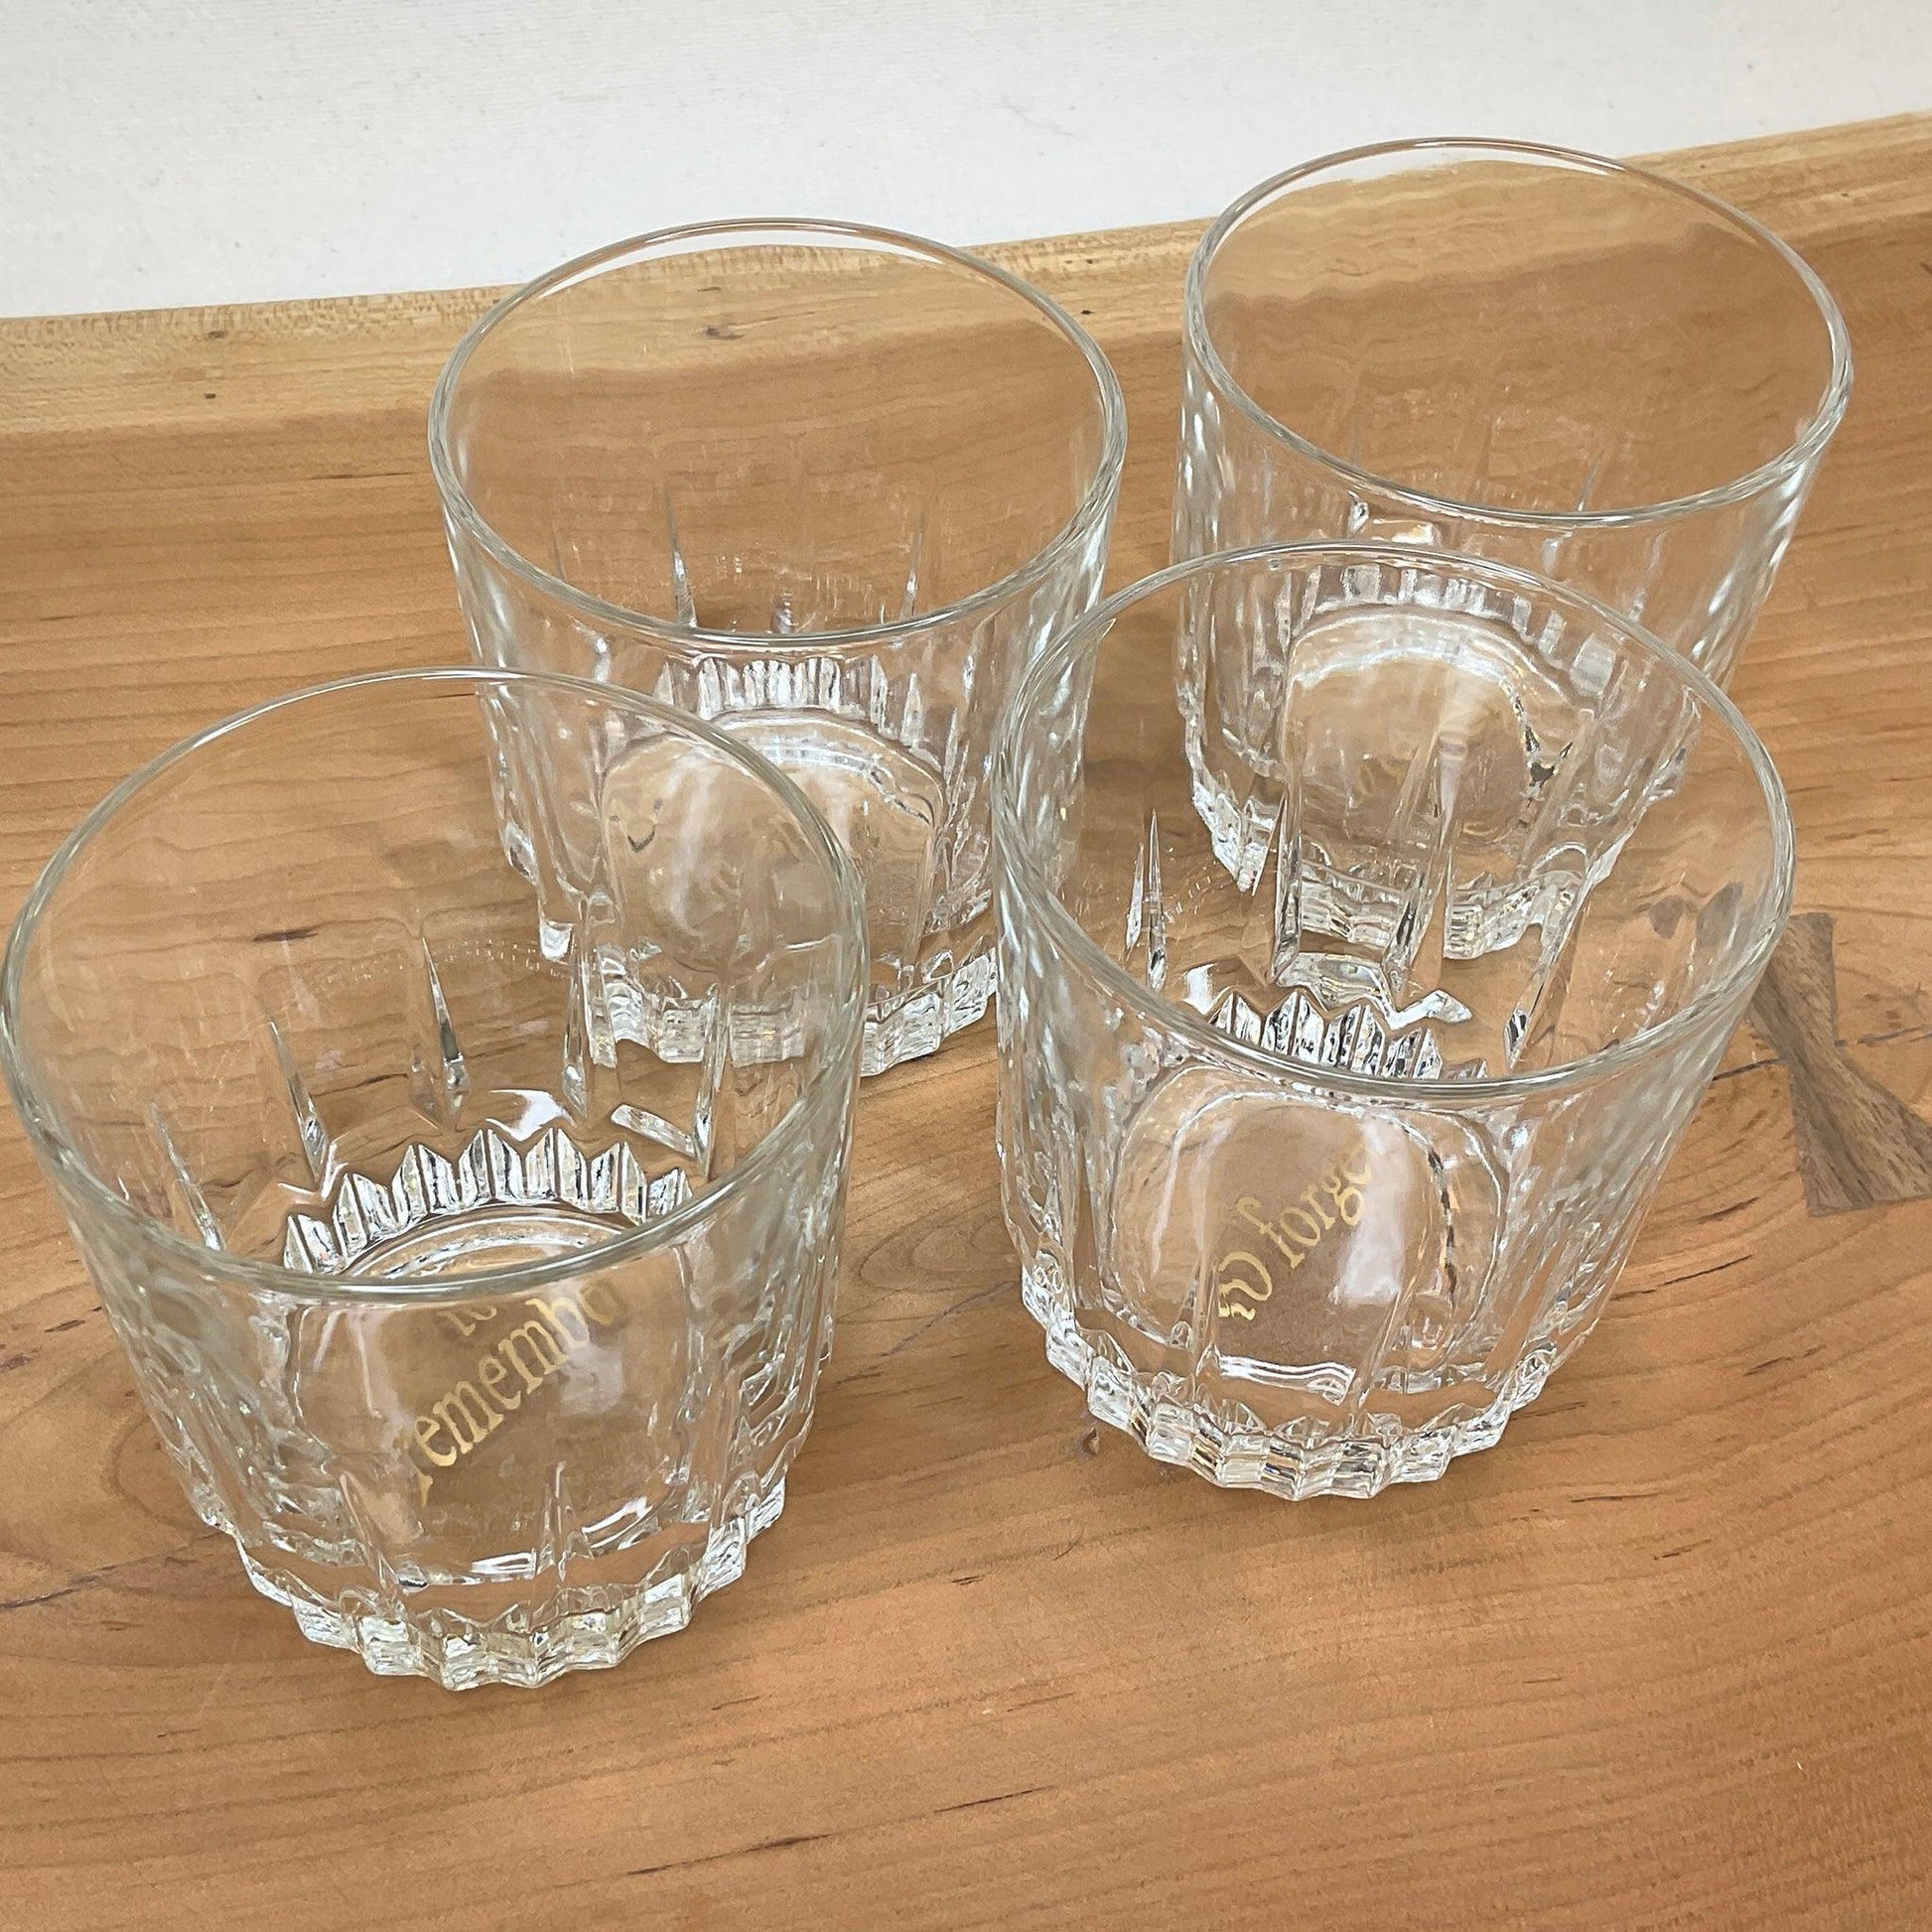 To Remember / To Forget Whiskey Glasses - Offensively Domestic